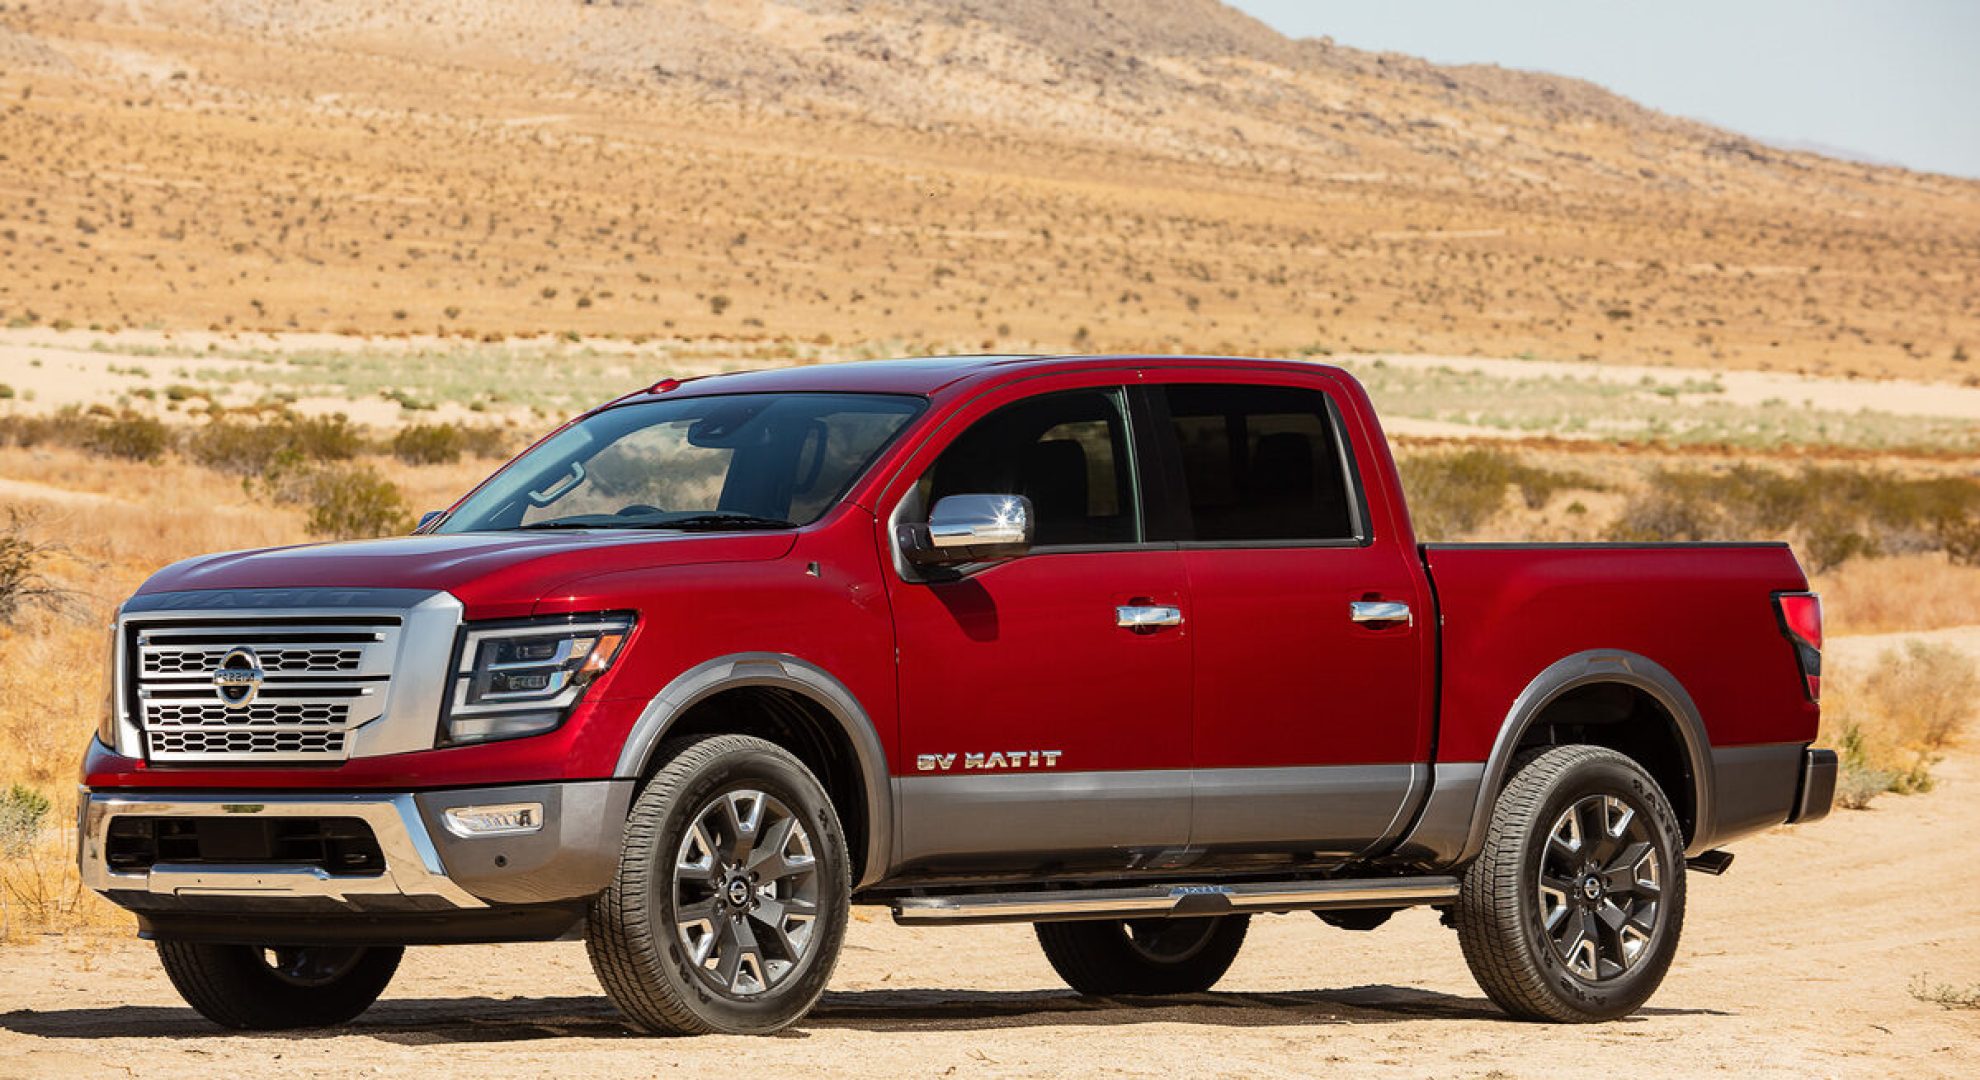 The Nissan TITAN full-size pickup undergoes an extensive redesign for the 2020 model year. The new TITAN features substantial powertrain updates and unique styling for different trim levels. TITAN now also offers standard Nissan Safety Shield 360 across all grade levels.